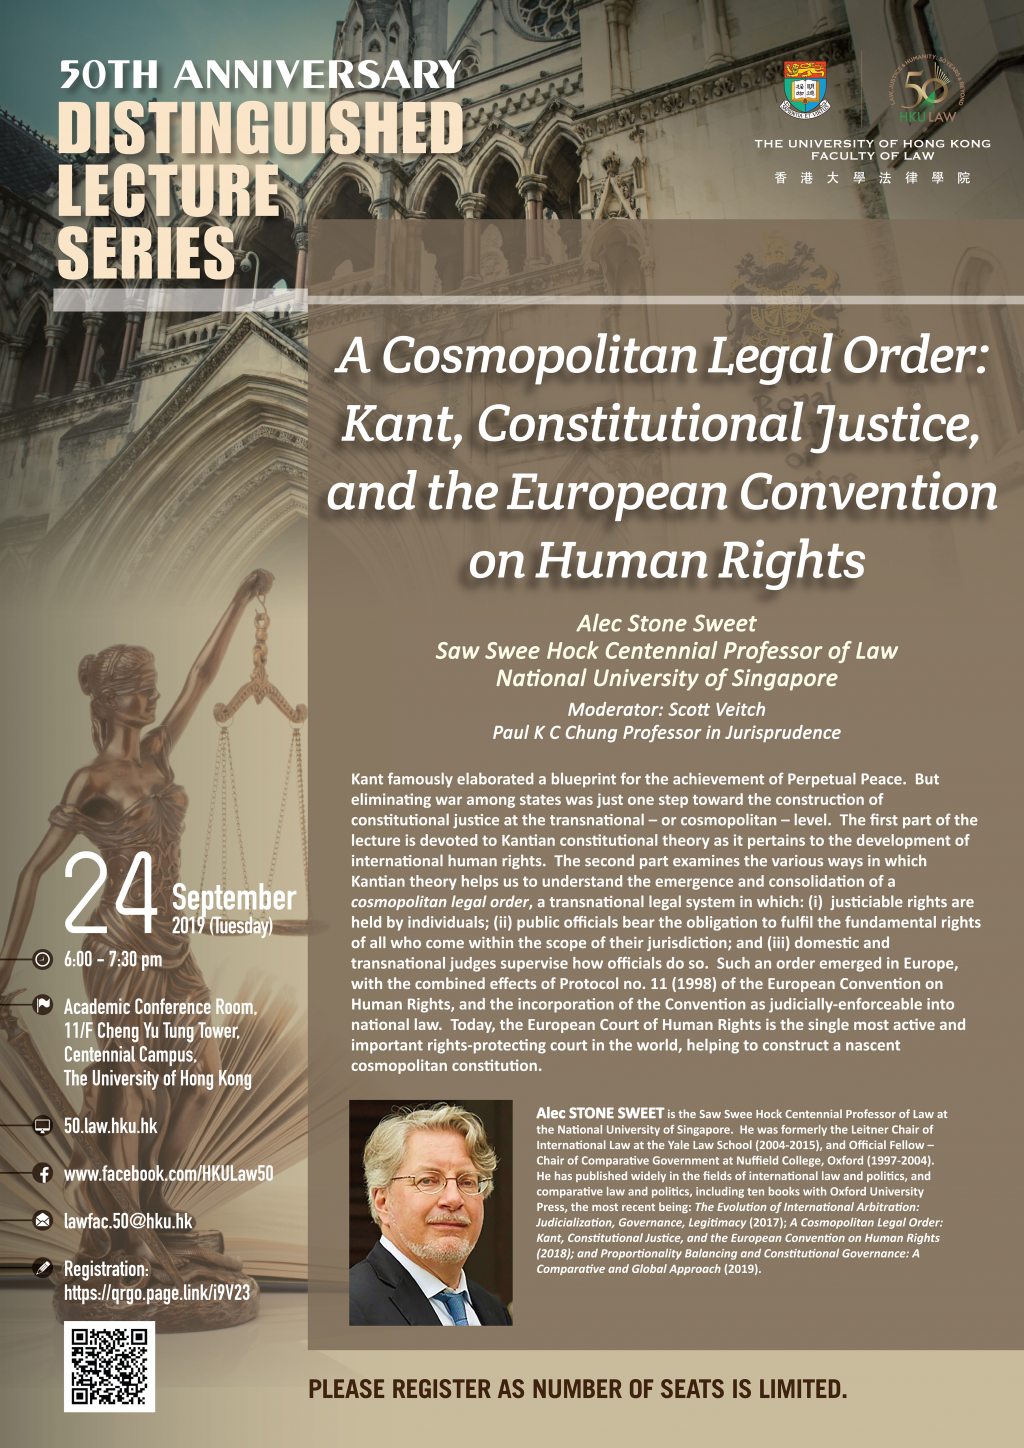 A Cosmopolitan Legal Order: Kant, Constitutional Justice, and the European Convention on Human Rights